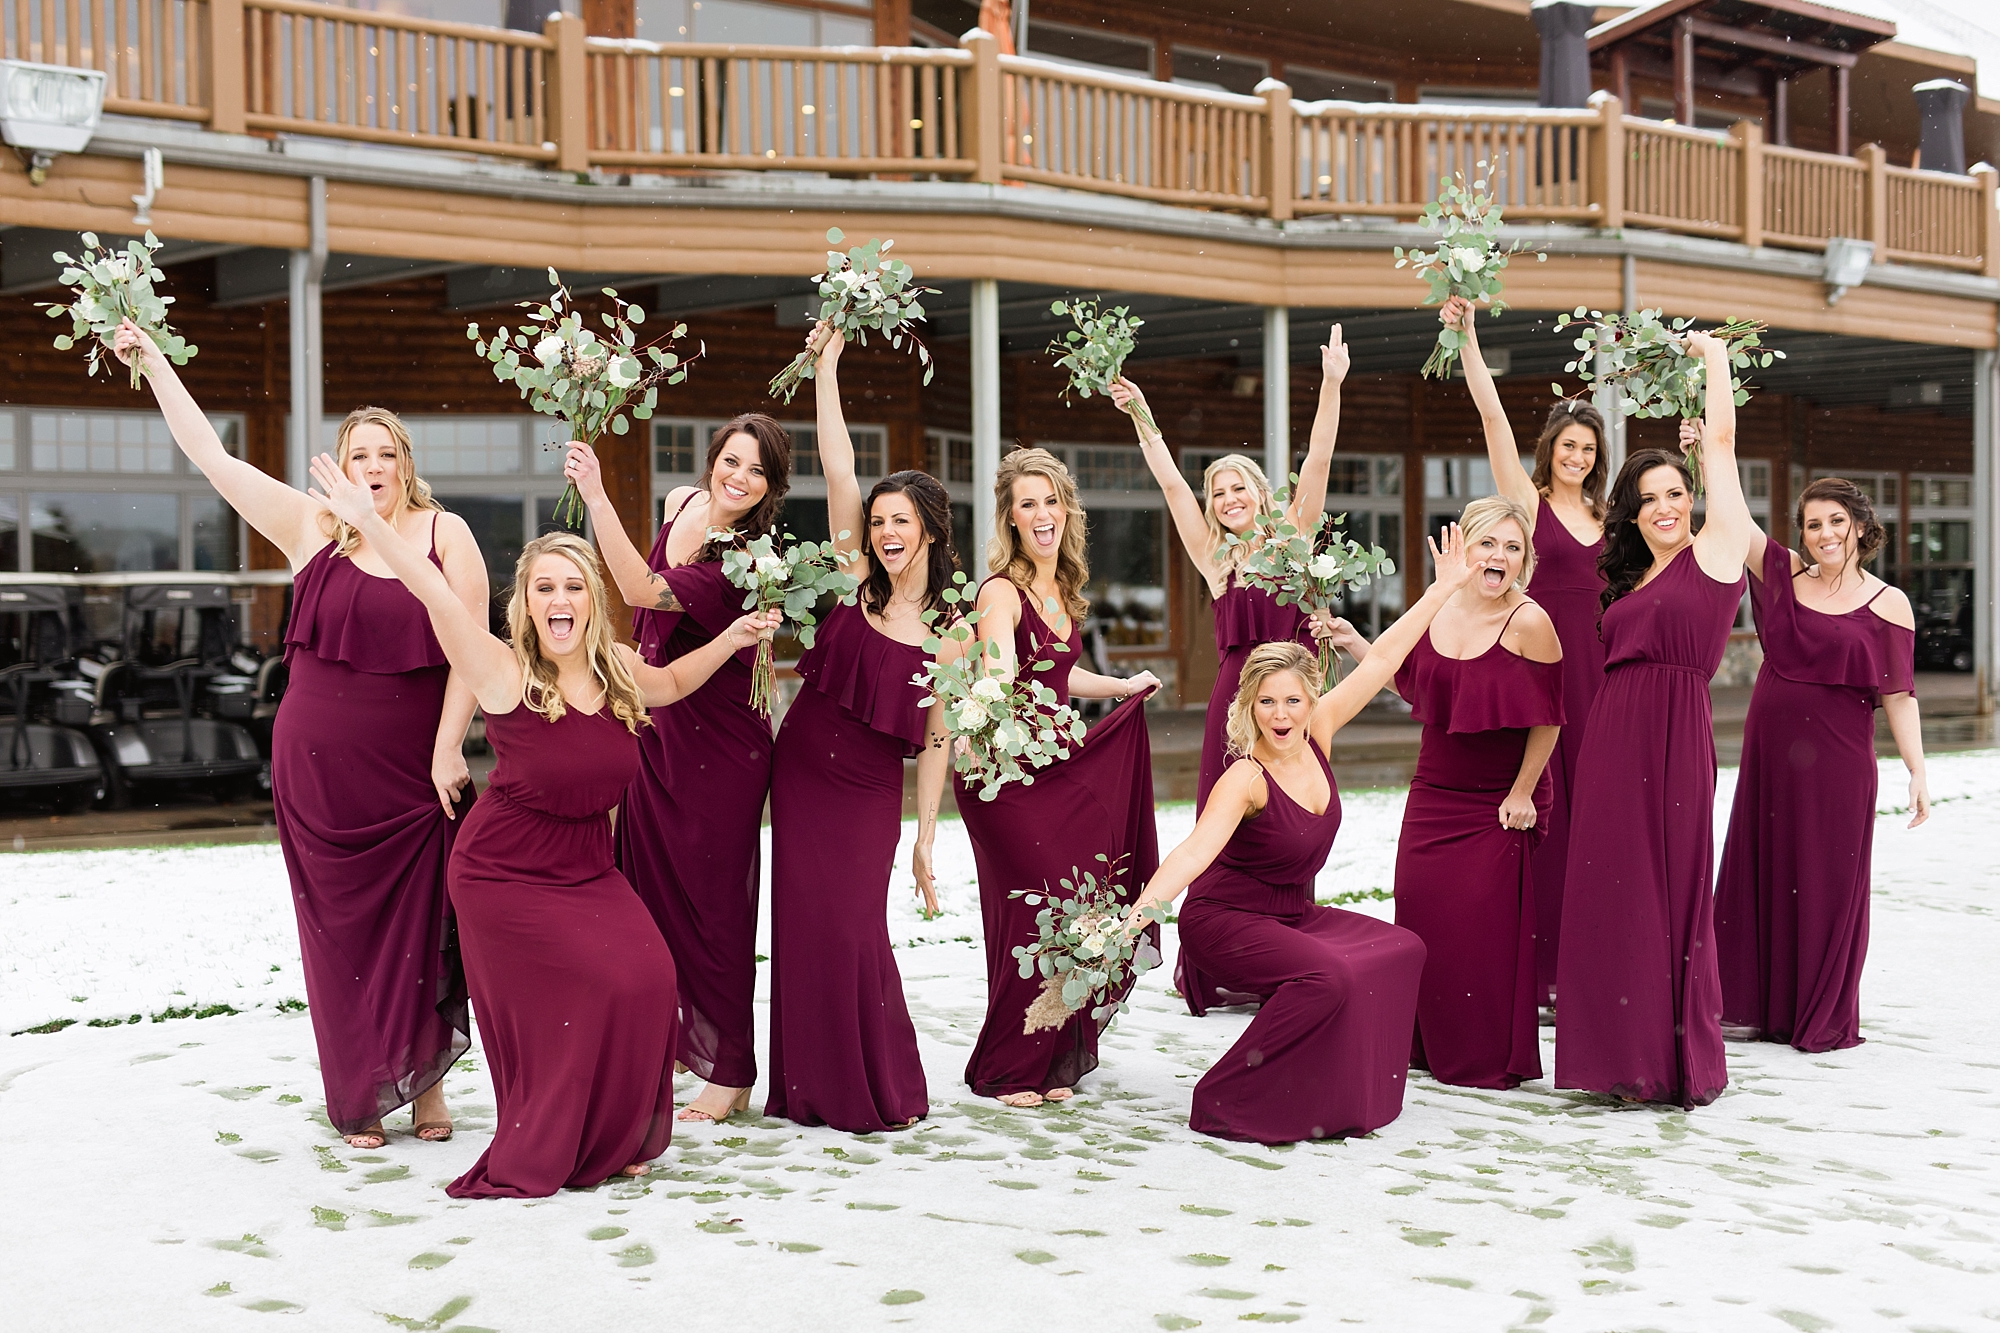 A snowy winter wedding at Solitude Links in Kimball, Michigan by Breanne Rochelle Photography.